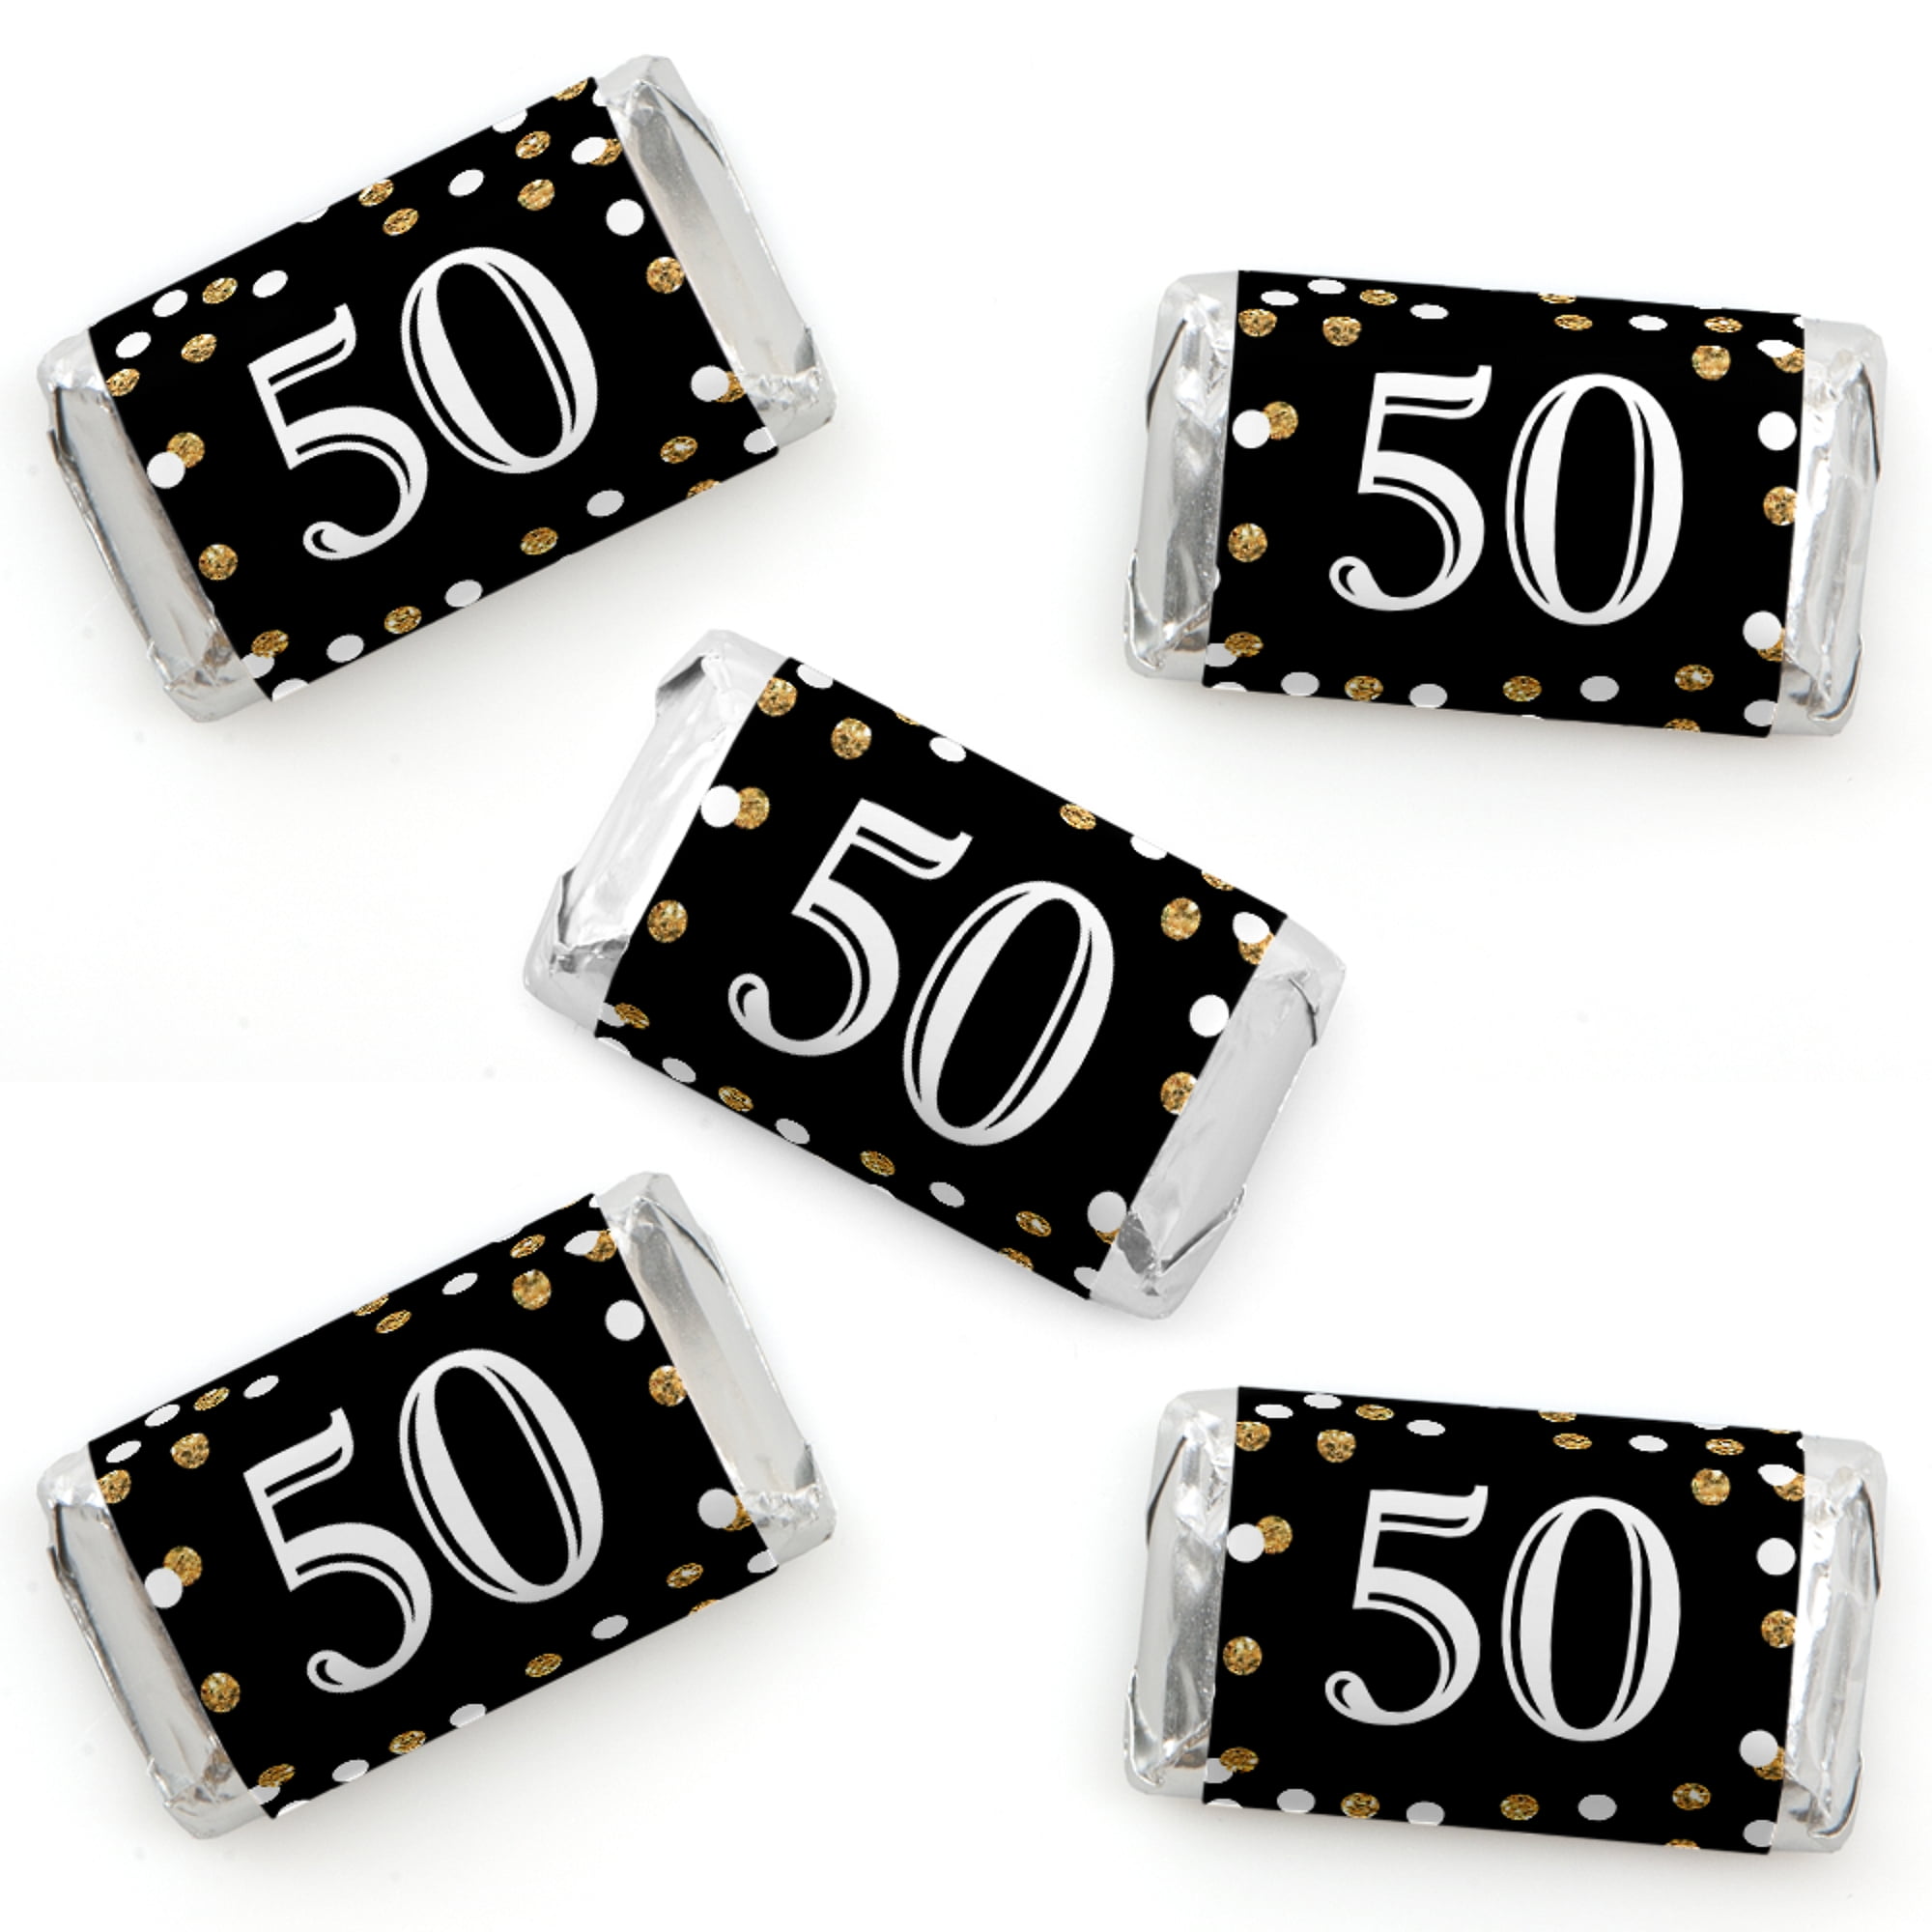 50 Milestone Year 15 Years Design Personalized Favor Bags Candy Buffet 